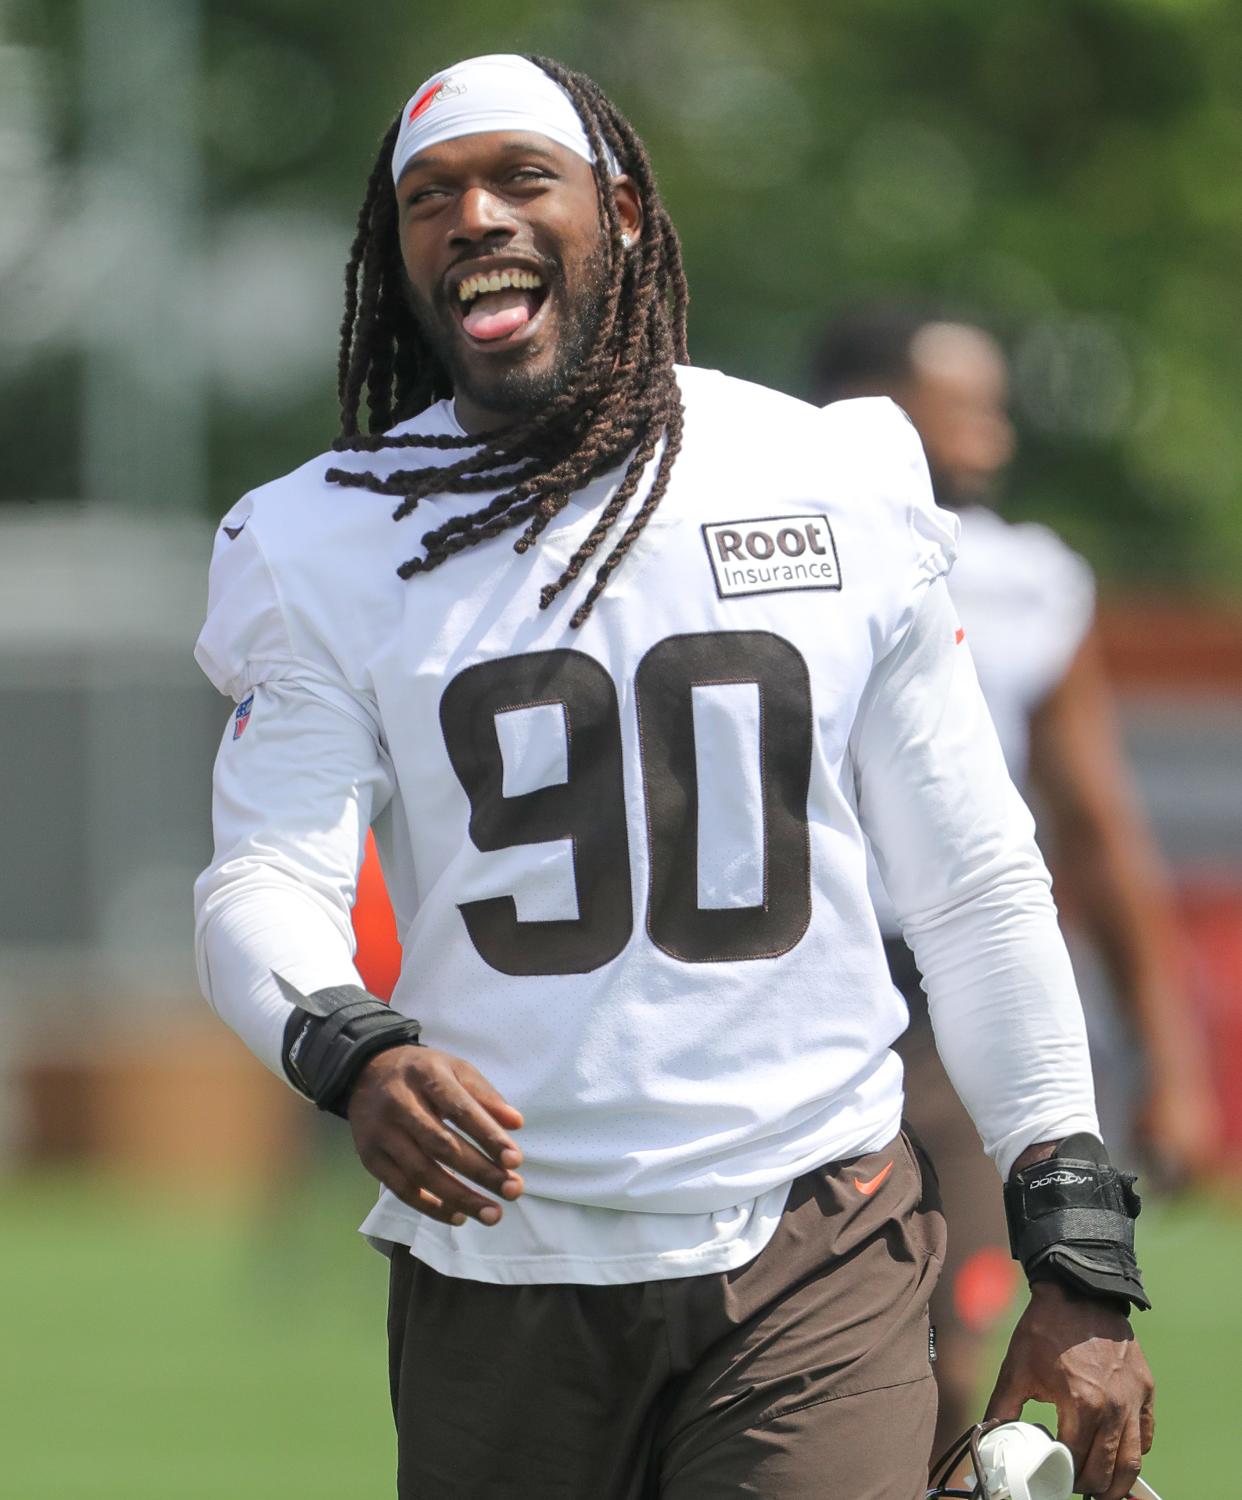 Cleveland Browns defensive end Jadeveon Clowney was all smiles after training camp on Thursday, July 28, 2022 in Berea.